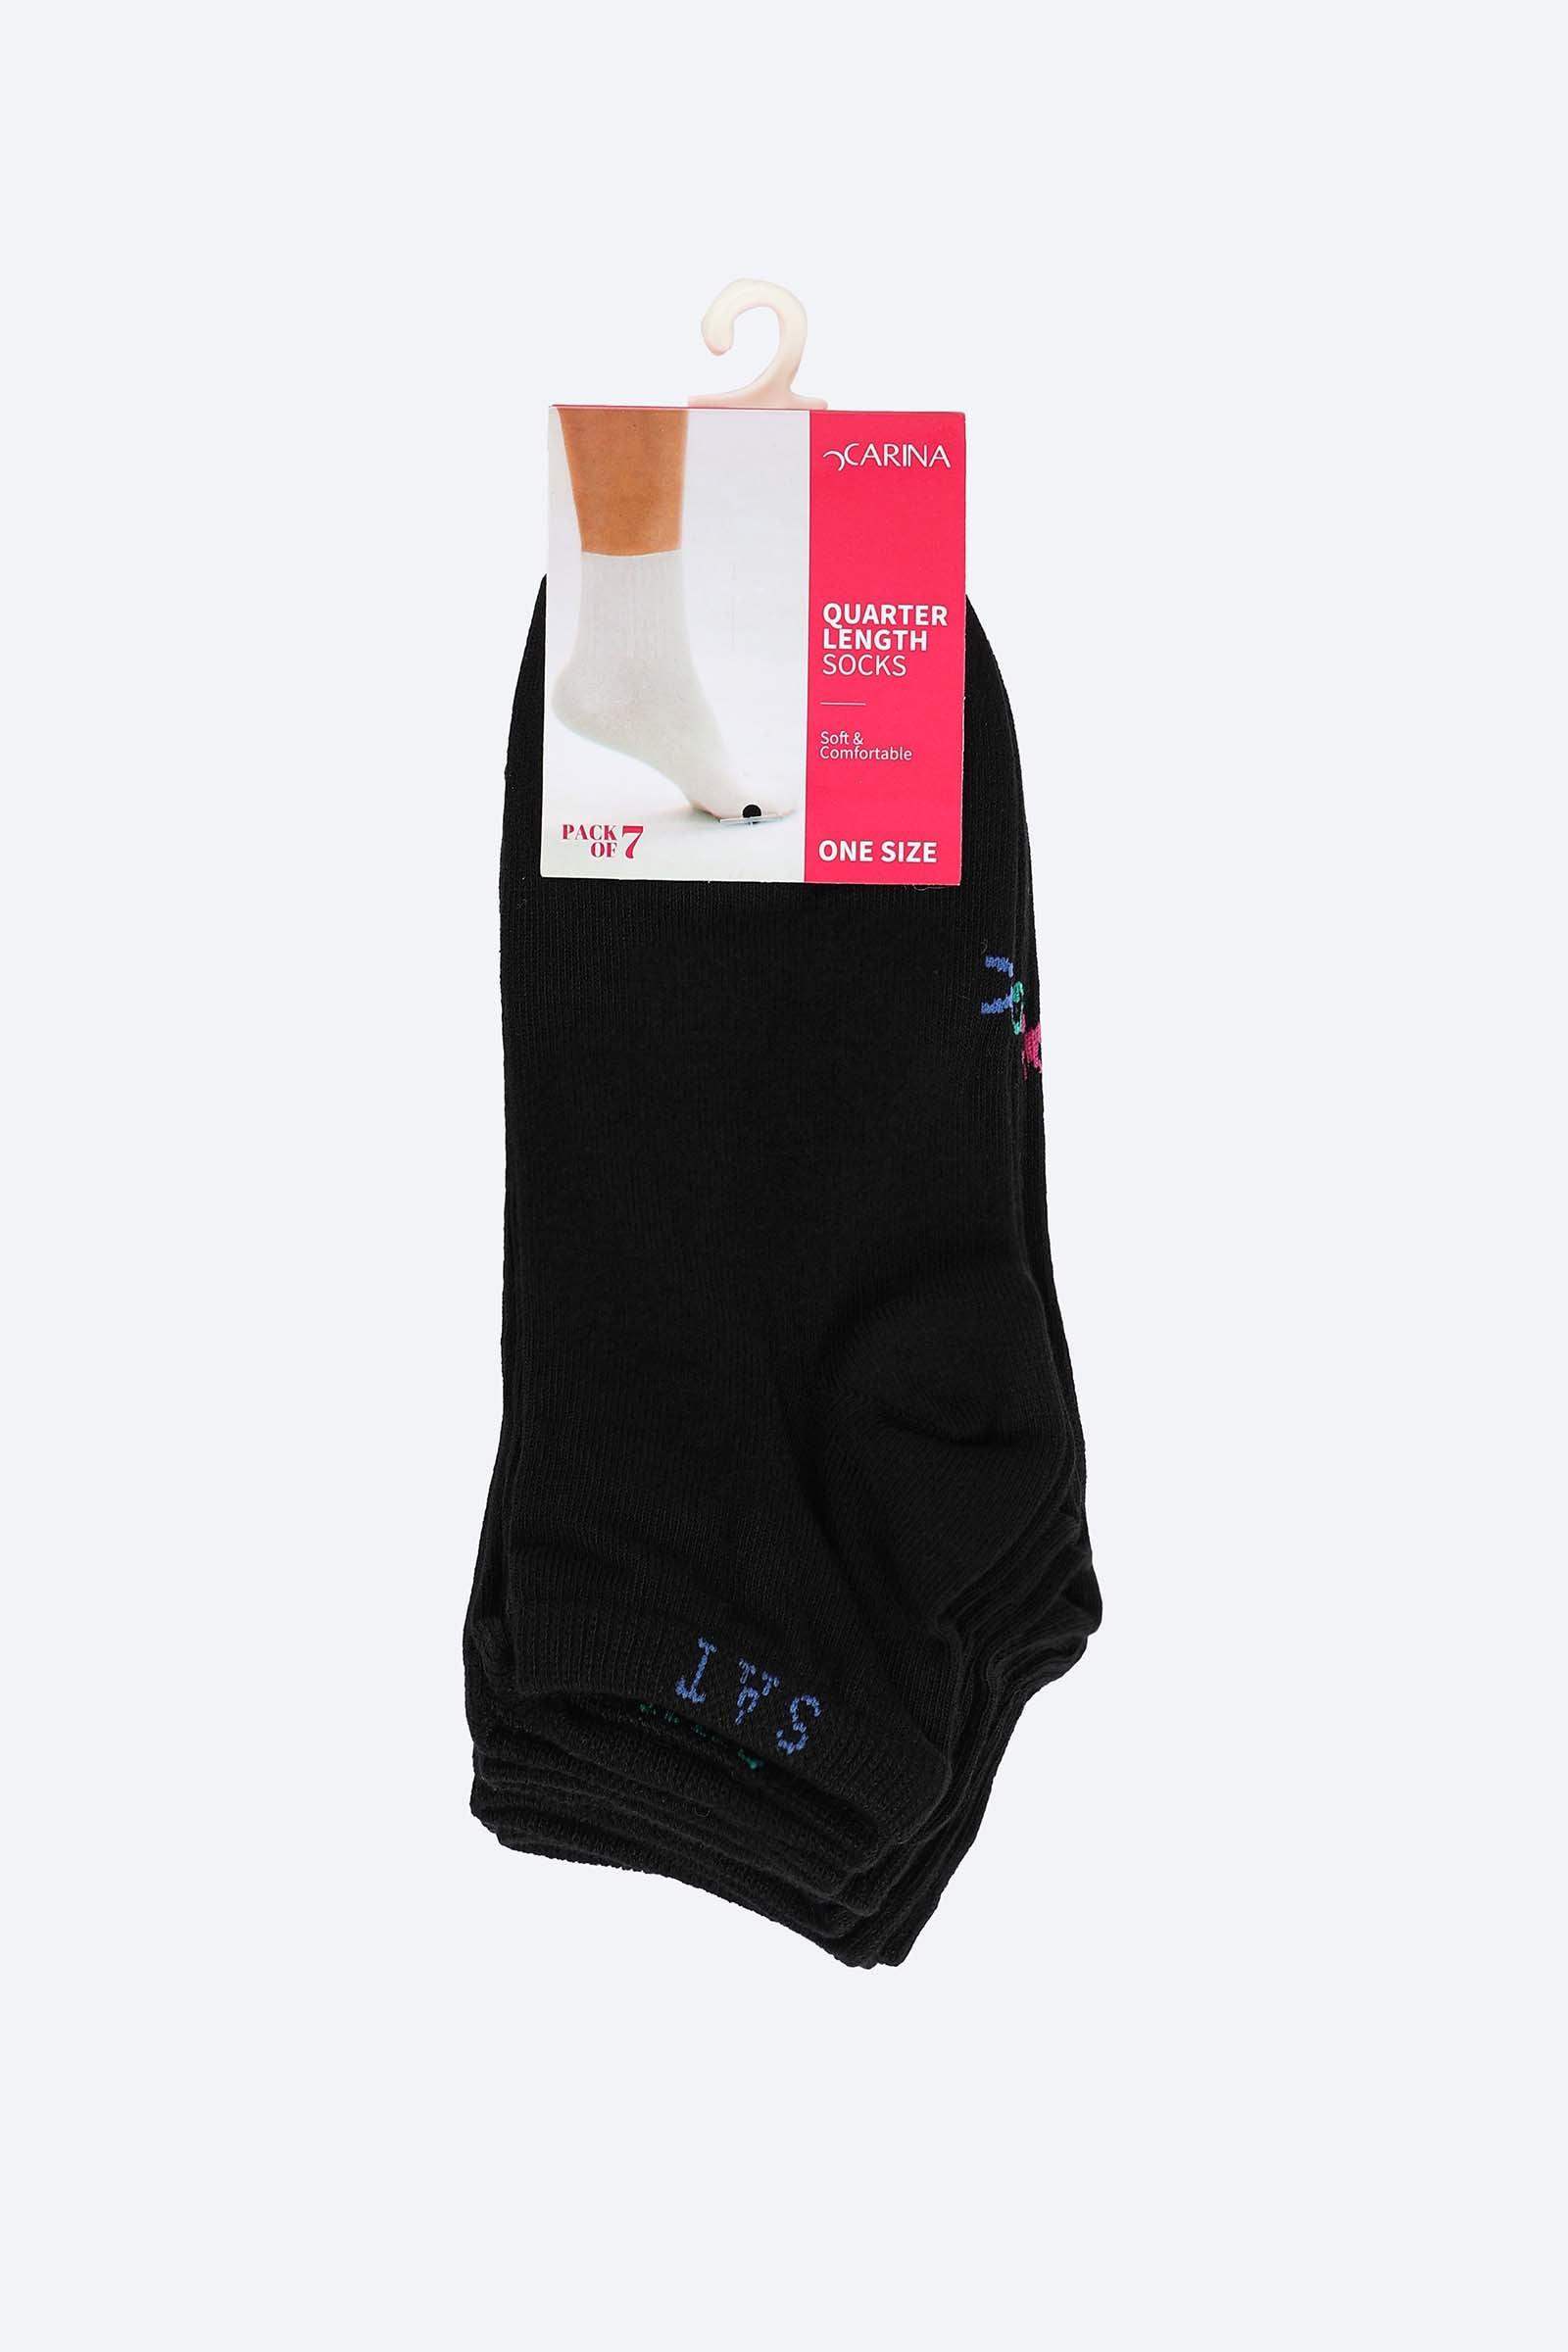 Solid Ankle Length Socks - 7 Pairs - Carina - كارينا